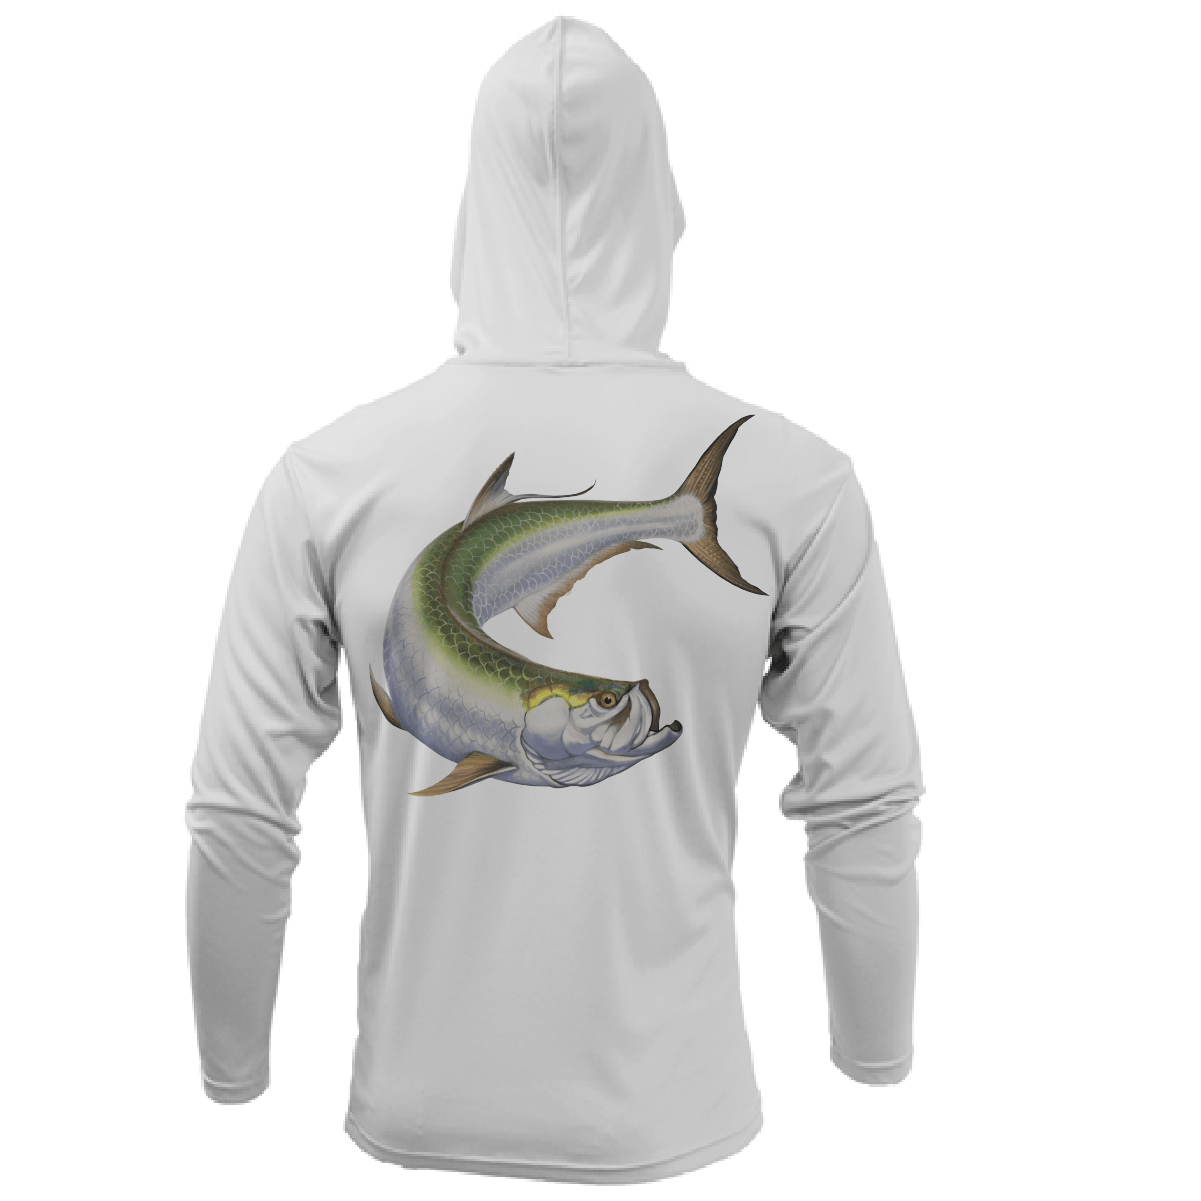 Bass Fishing Performance Dry-Fit 50+ UPF Sun Protection Shirts -Reel Fishy Apparel S / Gray S/S - unisex